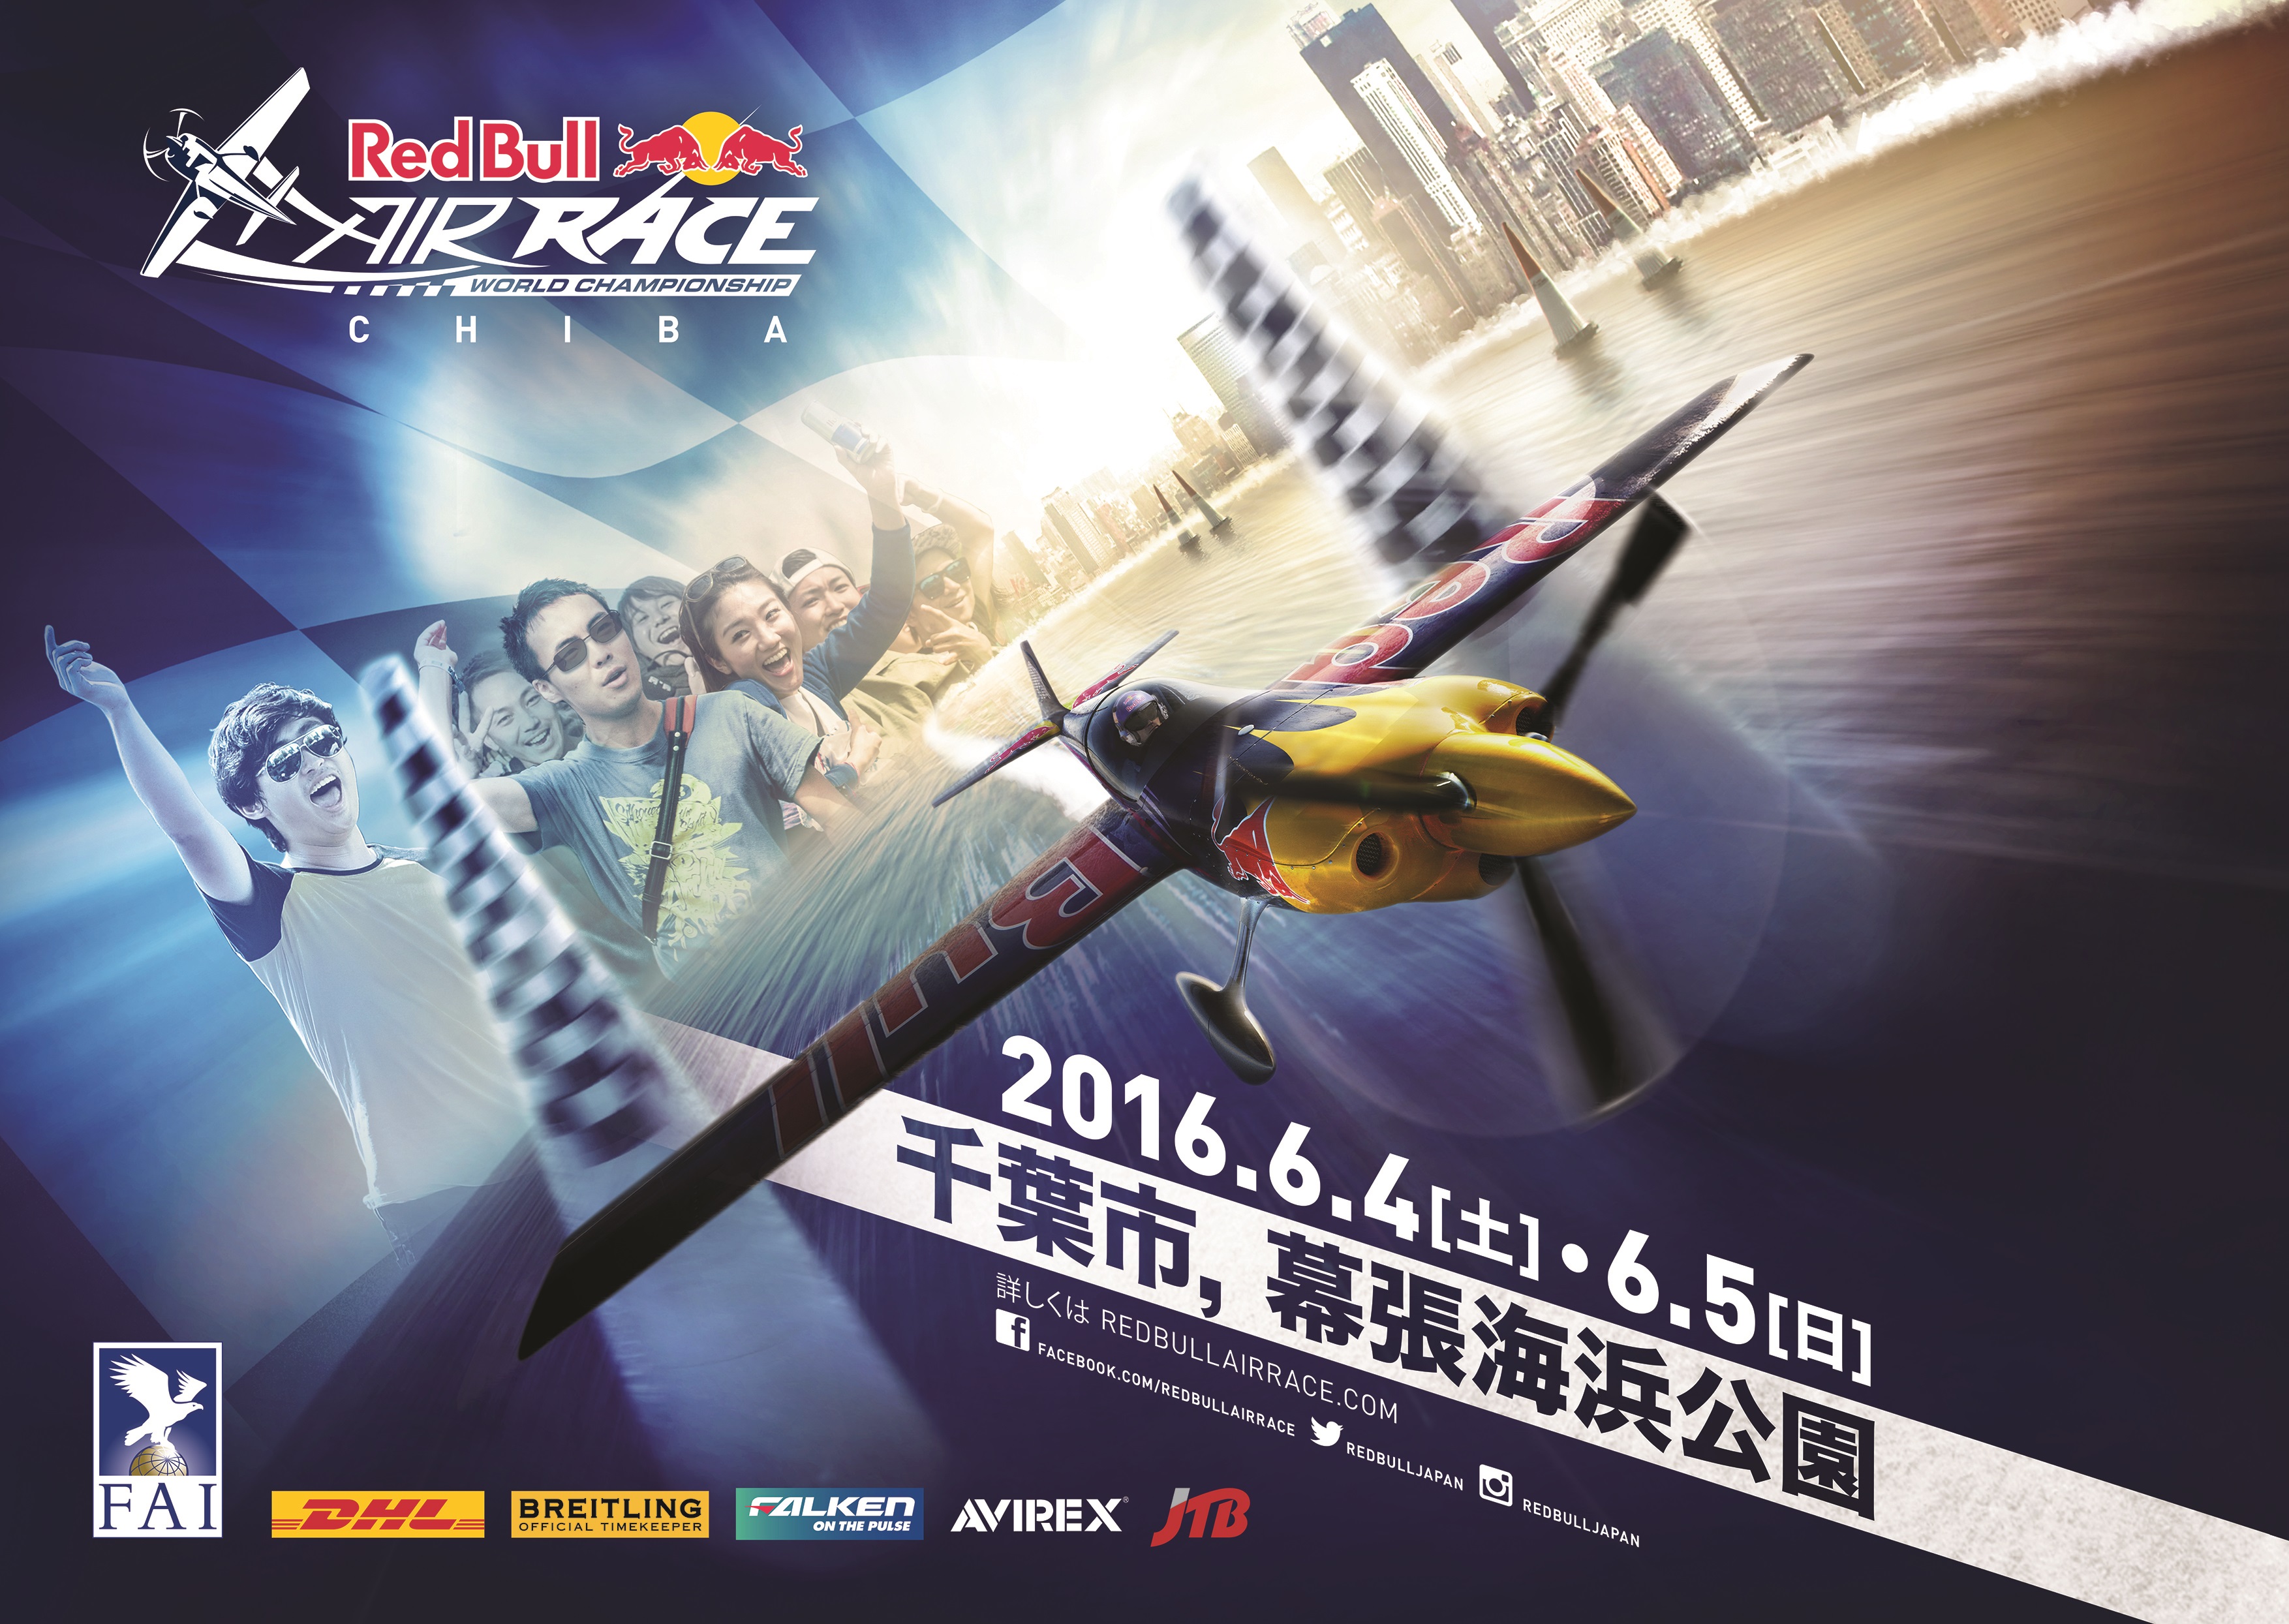 Falken to support Chiba leg of Red Bull Air Race for second year